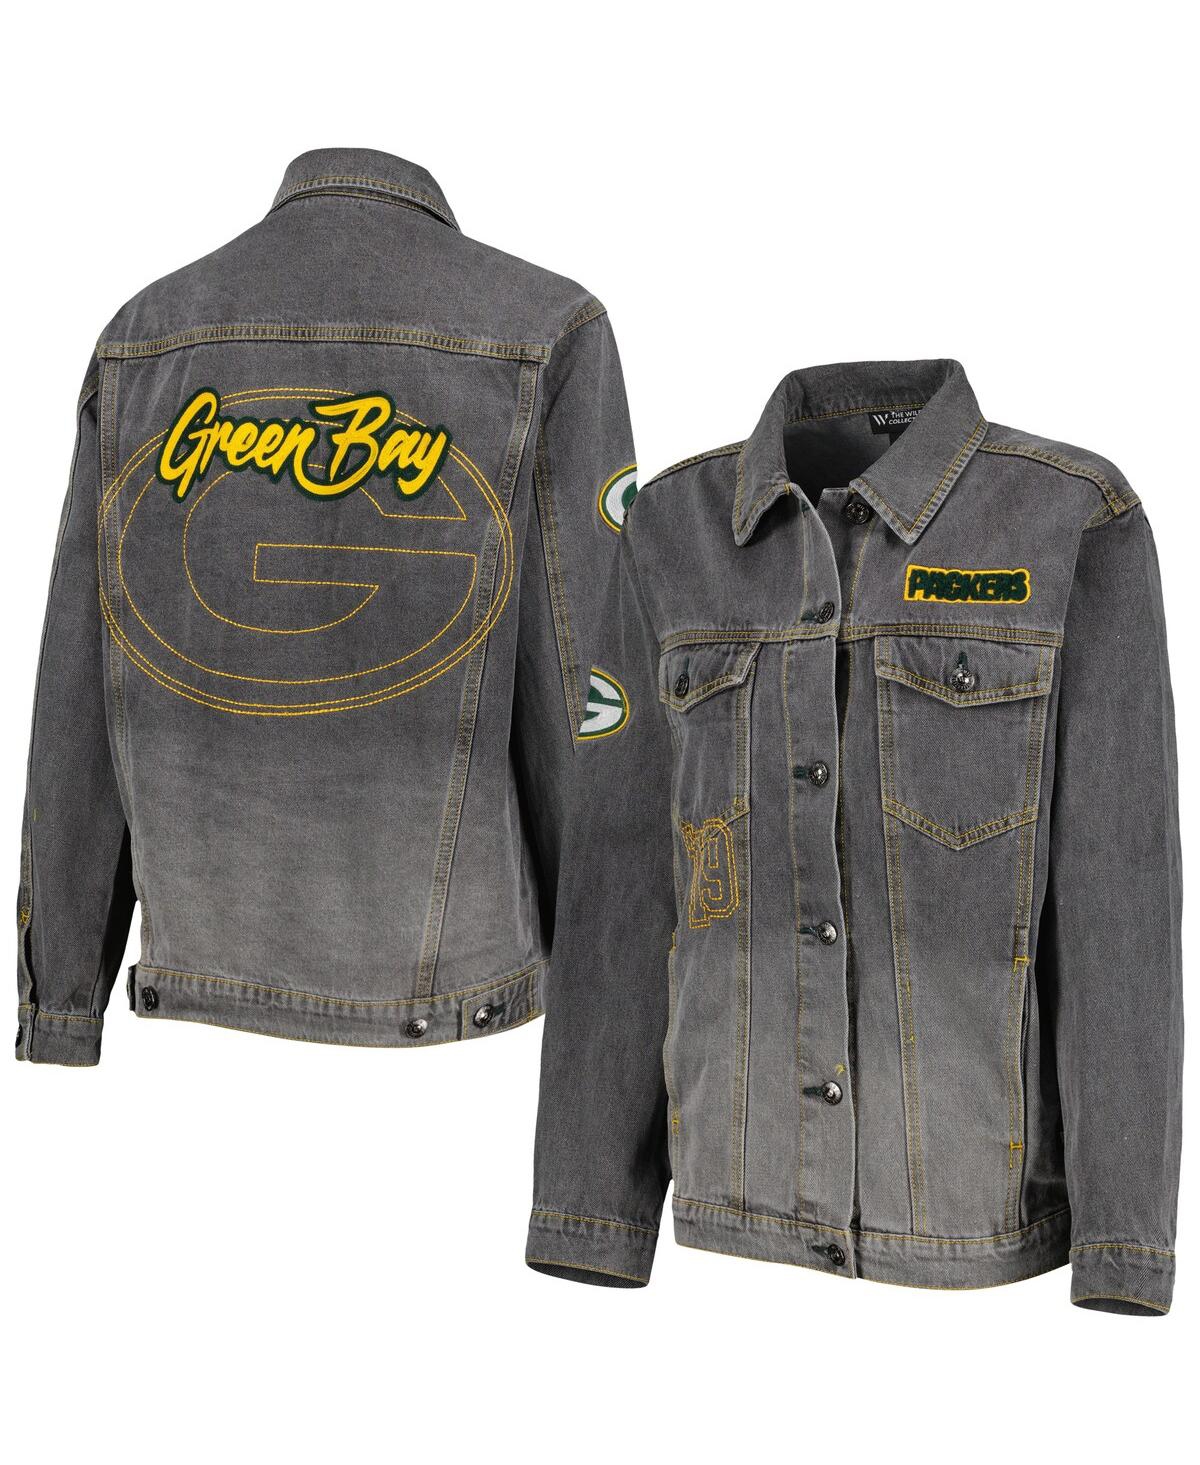 Shop The Wild Collective Women's  Denim Green Bay Packers Faded Button-up Jacket